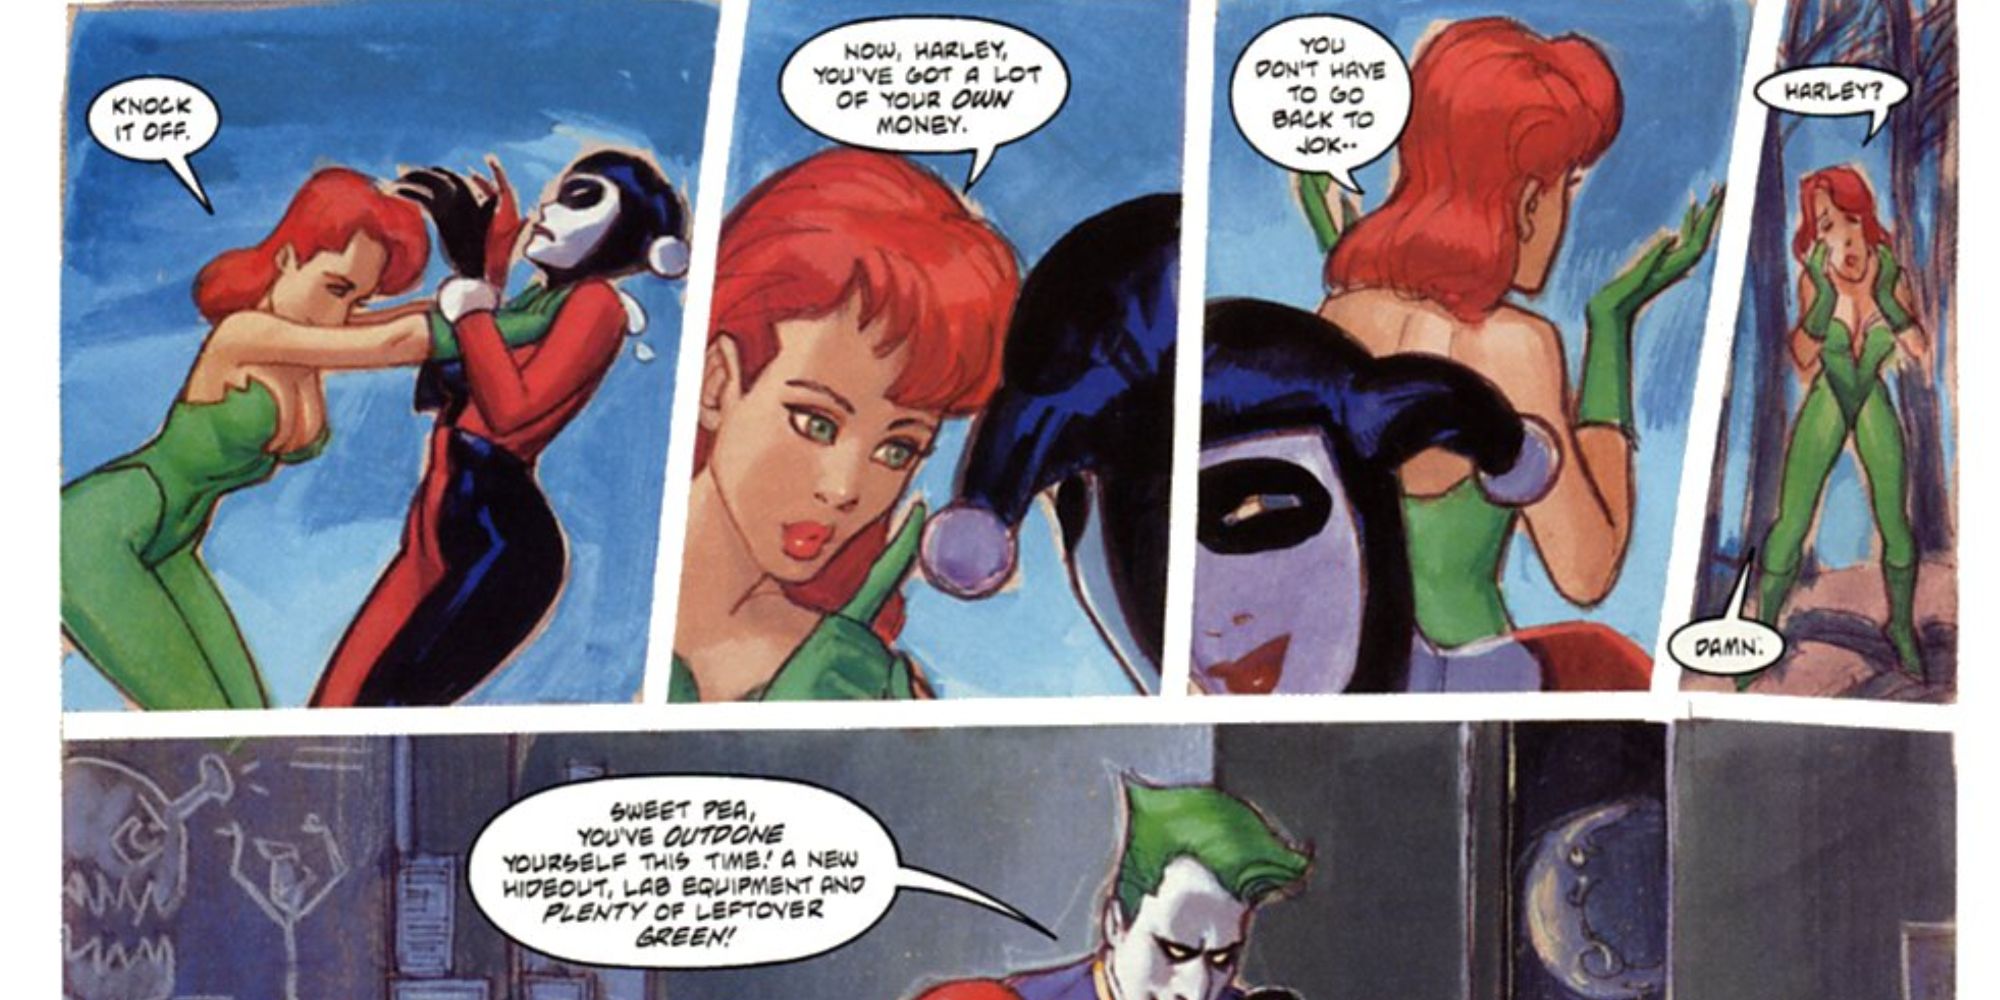 Poison Ivy gives Harley Quinn money in DC Comics.